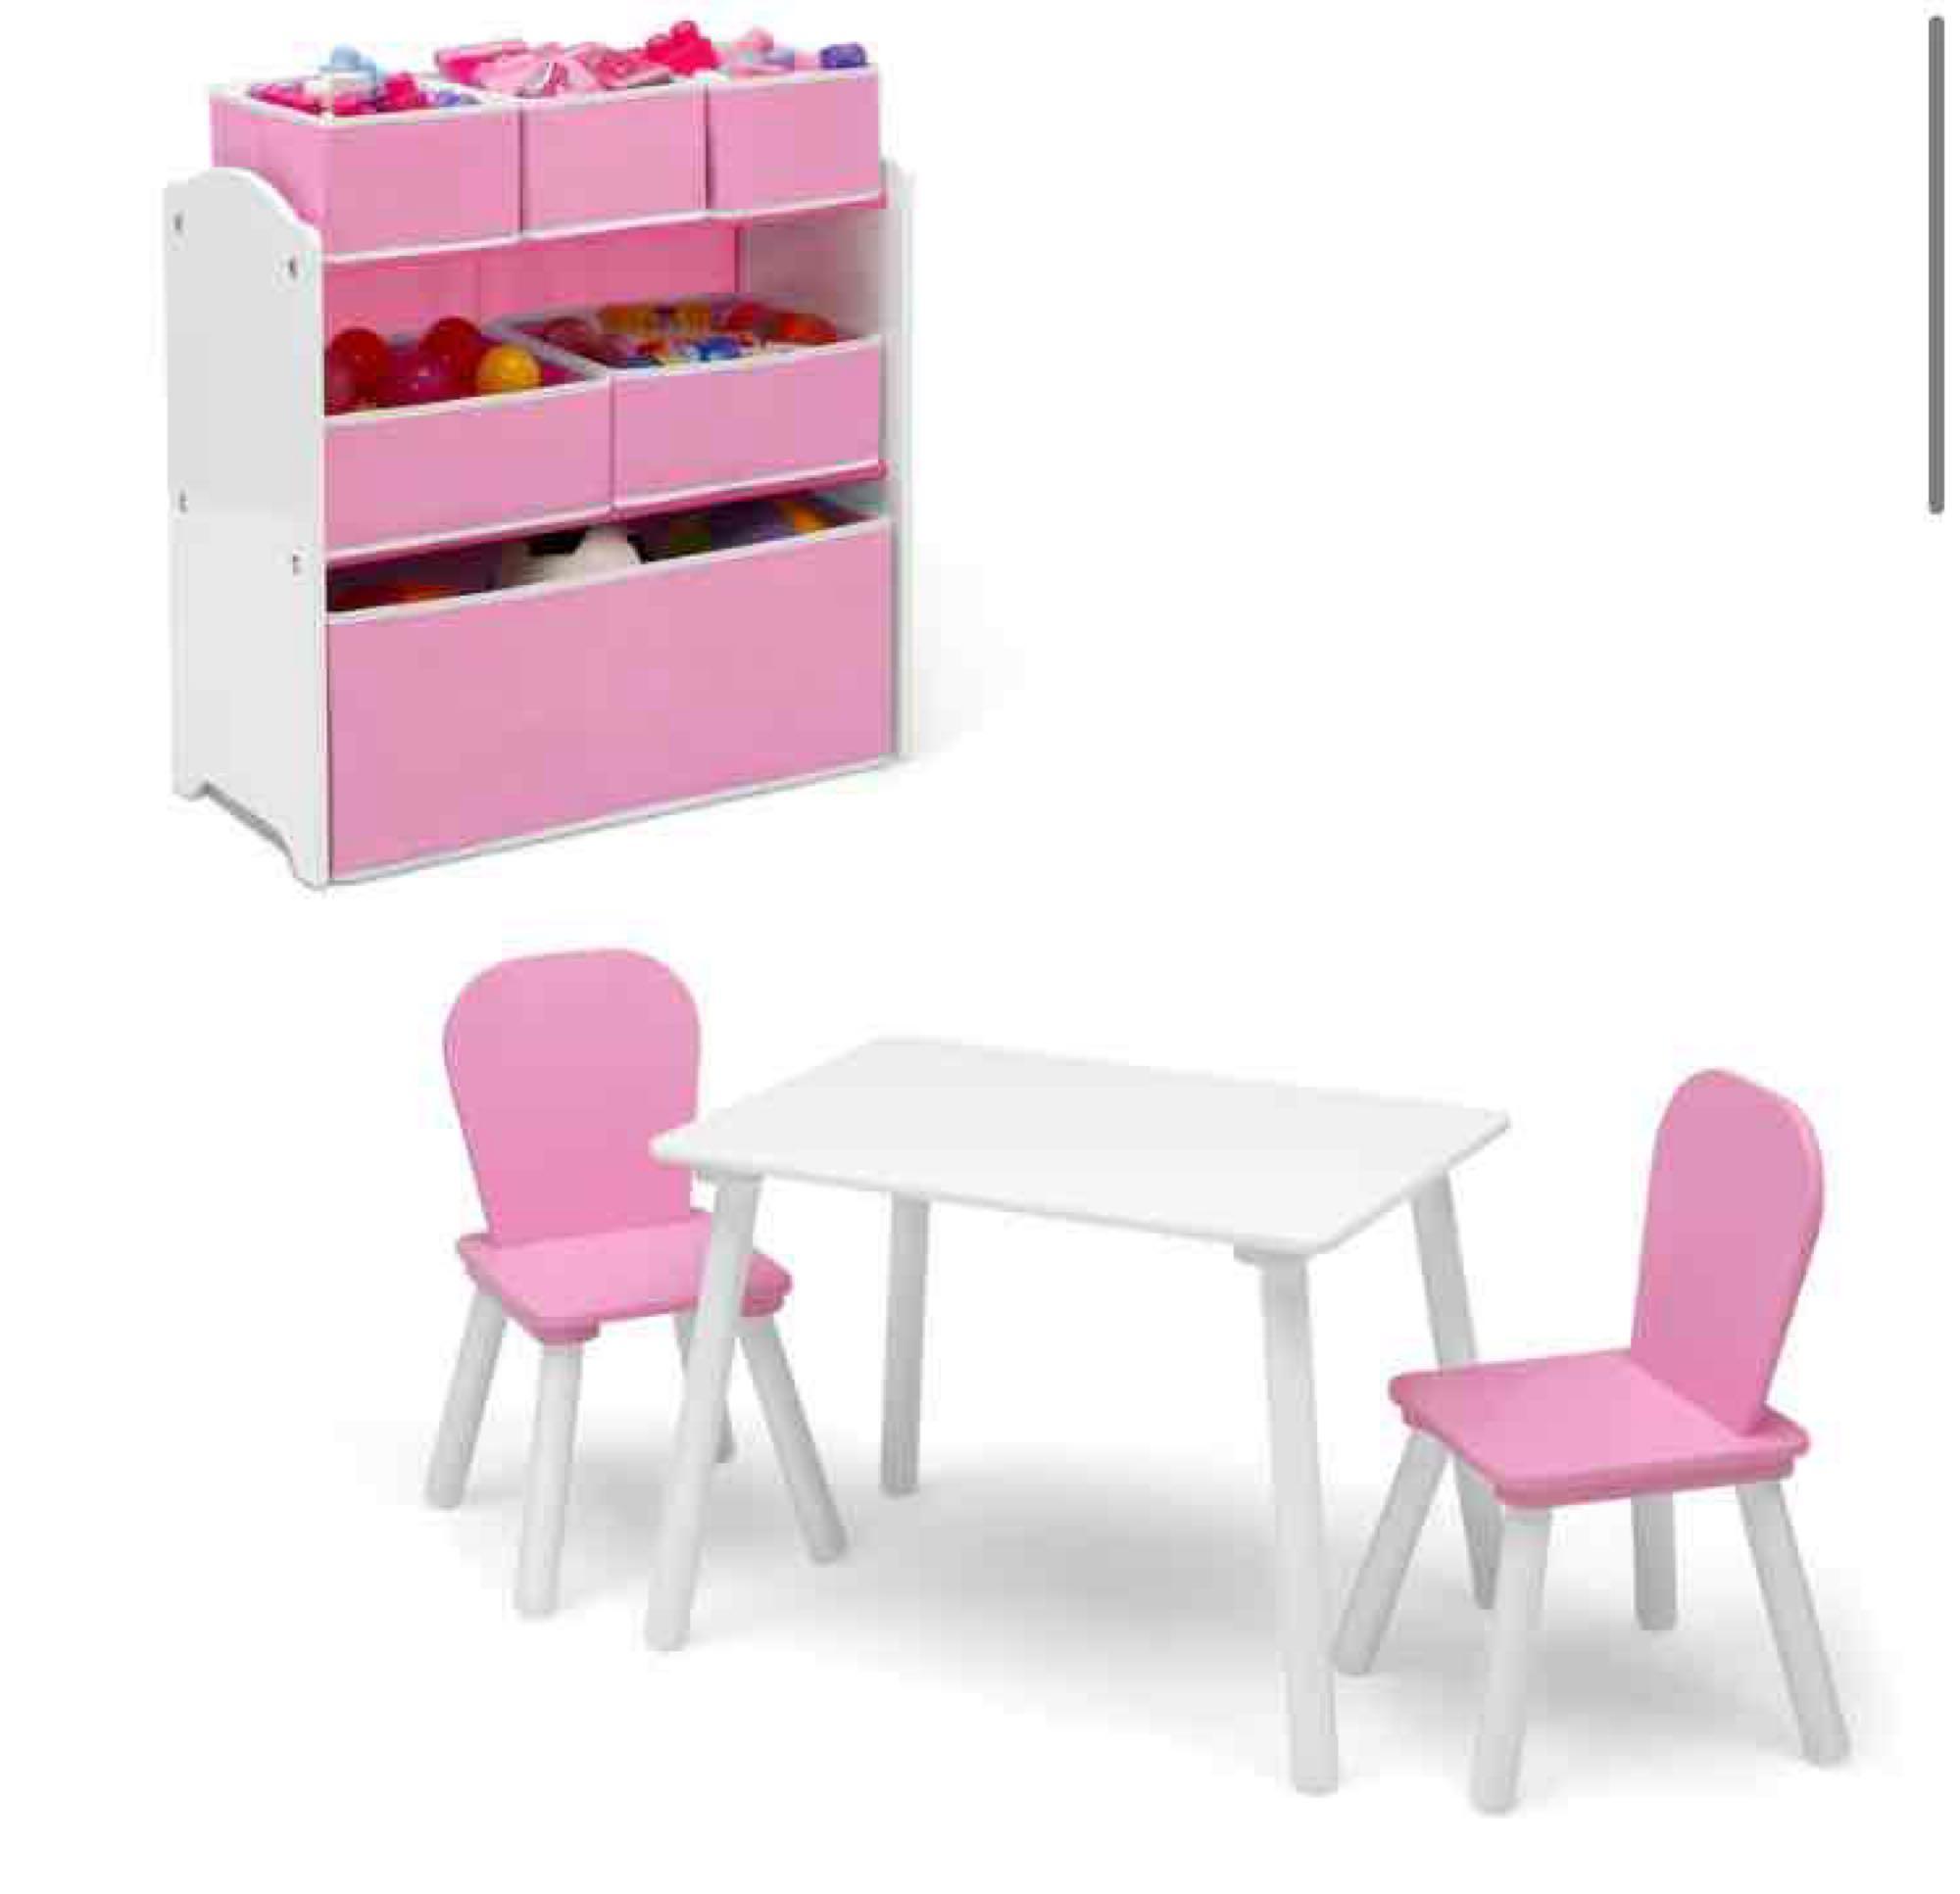 Delta Children 4-Piece Toddler Playroom Set ? Includes Play Table and 6 Bin Toy Organizer with